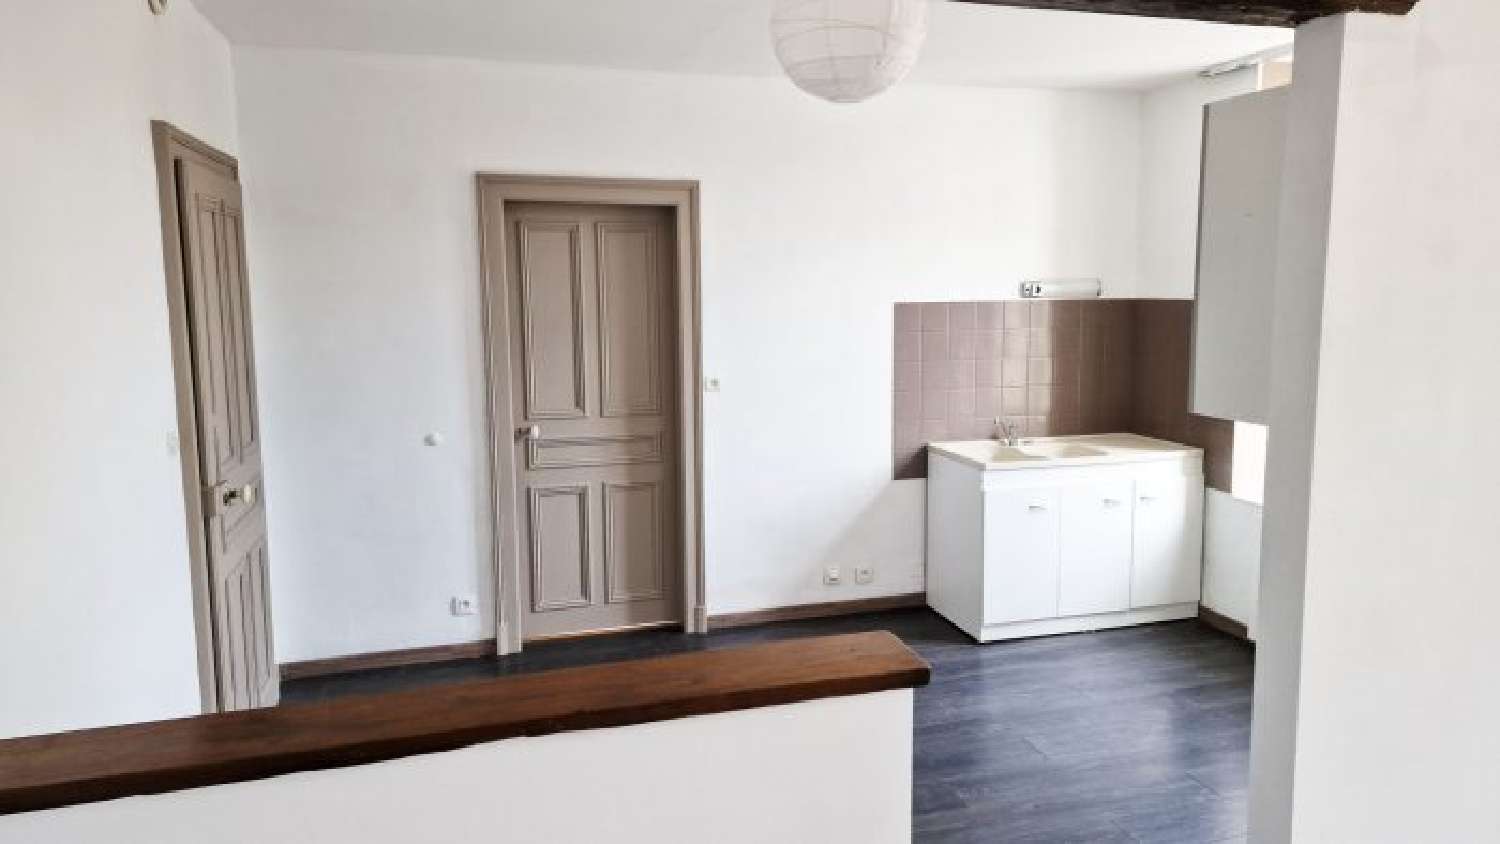  te koop appartement Pagny-sur-Moselle Meurthe-et-Moselle 8